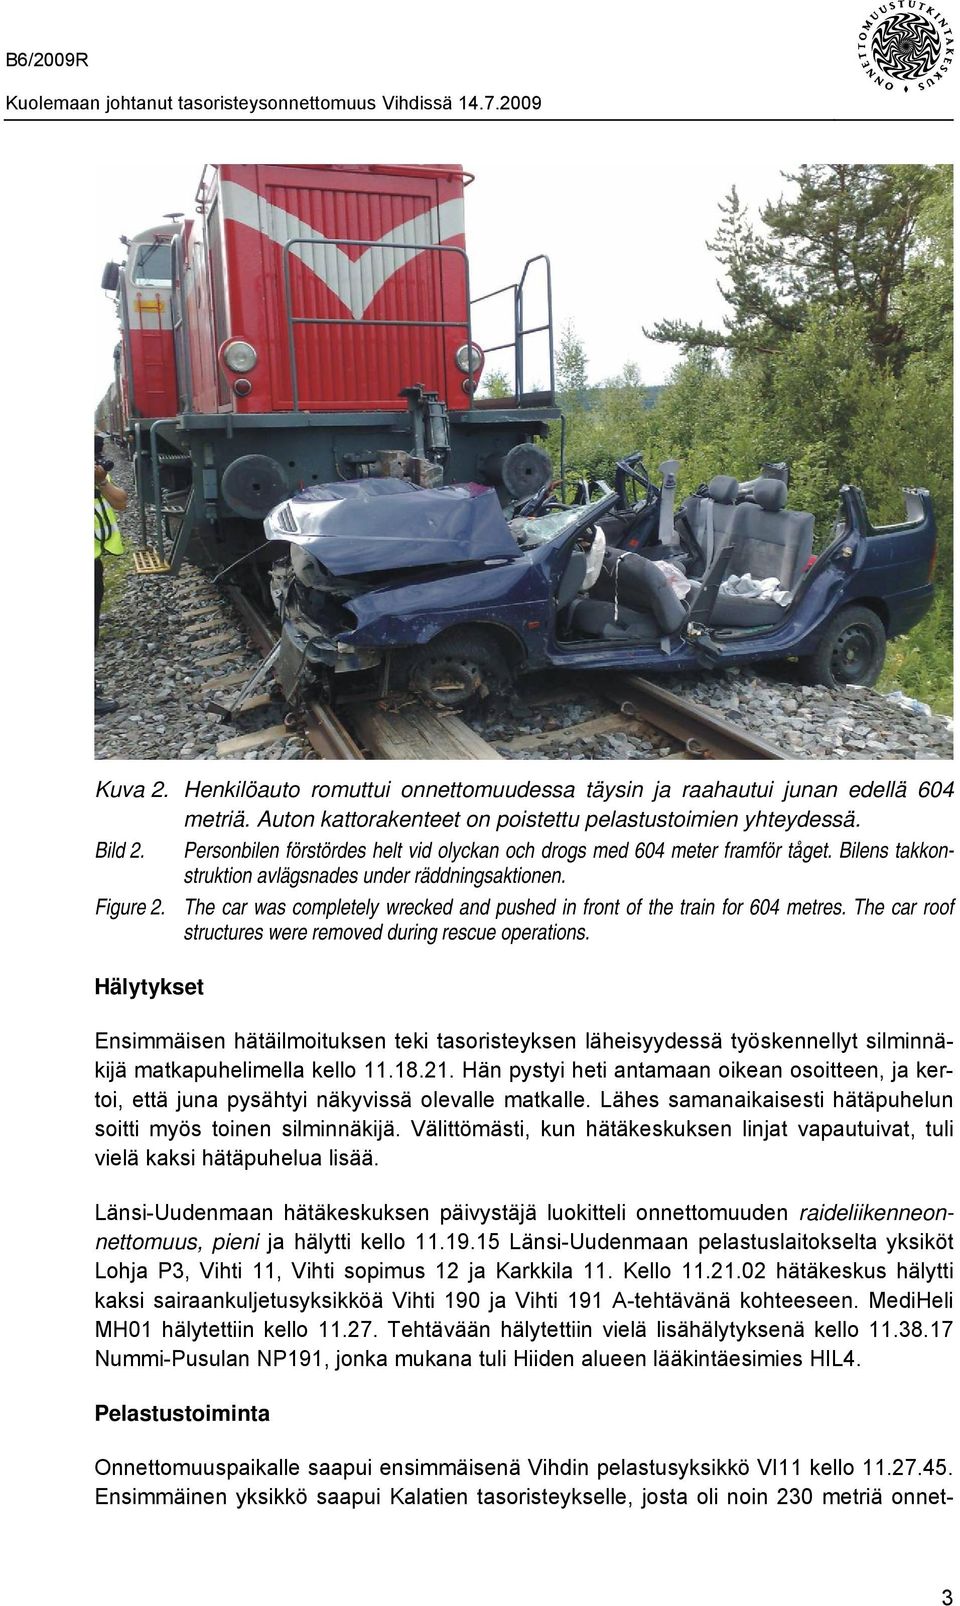 The car was completely wrecked and pushed in front of the train for 604 metres. The car roof structures were removed during rescue operations.